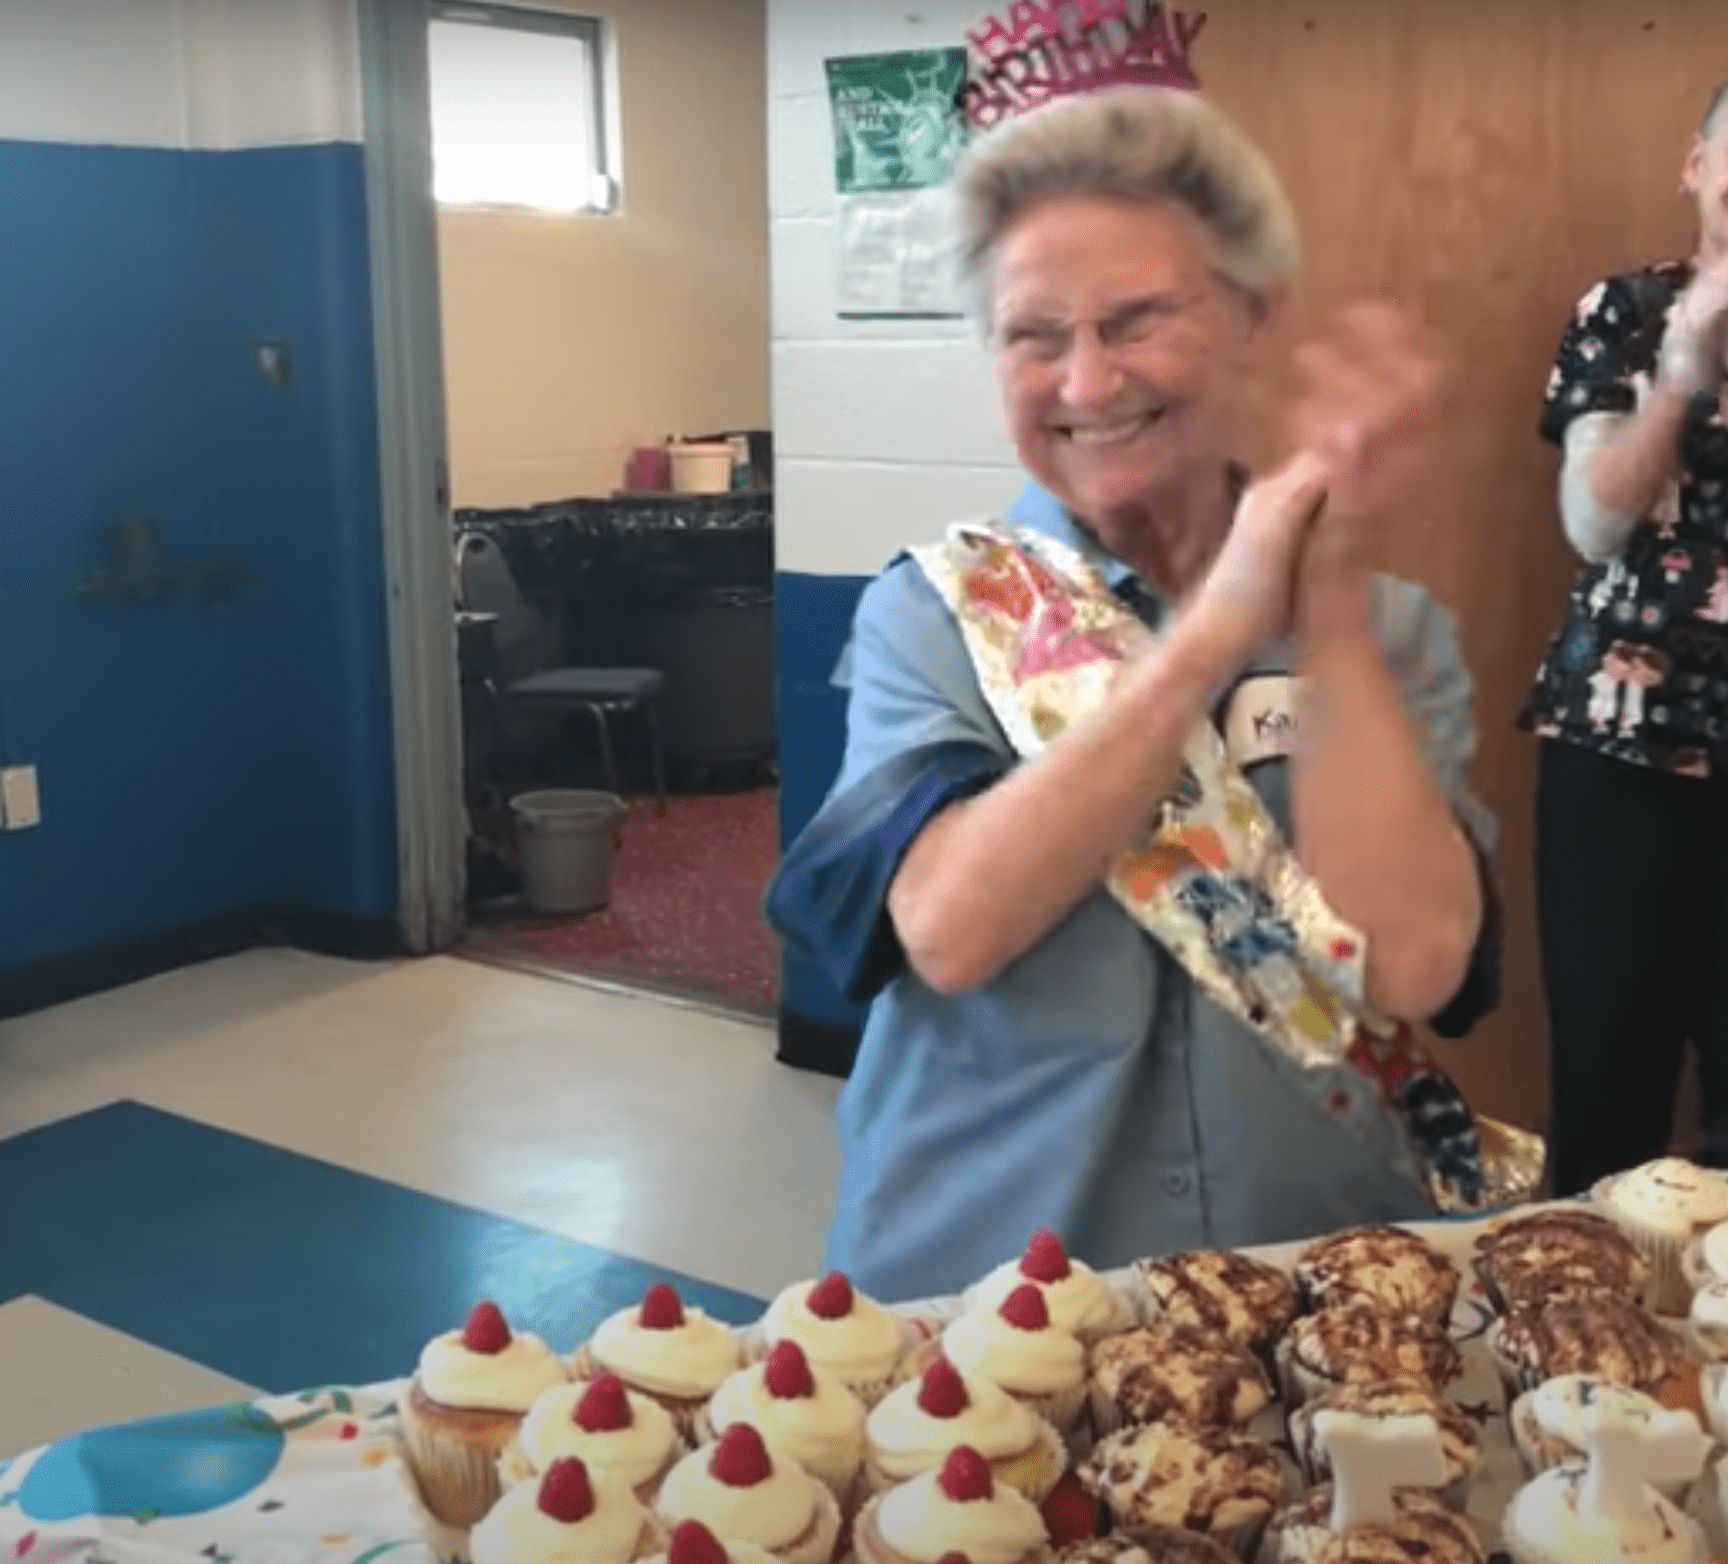 Frances Buzzard claps and is ecstatic during her surprise birthday party | Source: Youtube/Charleston Gazette-Mail